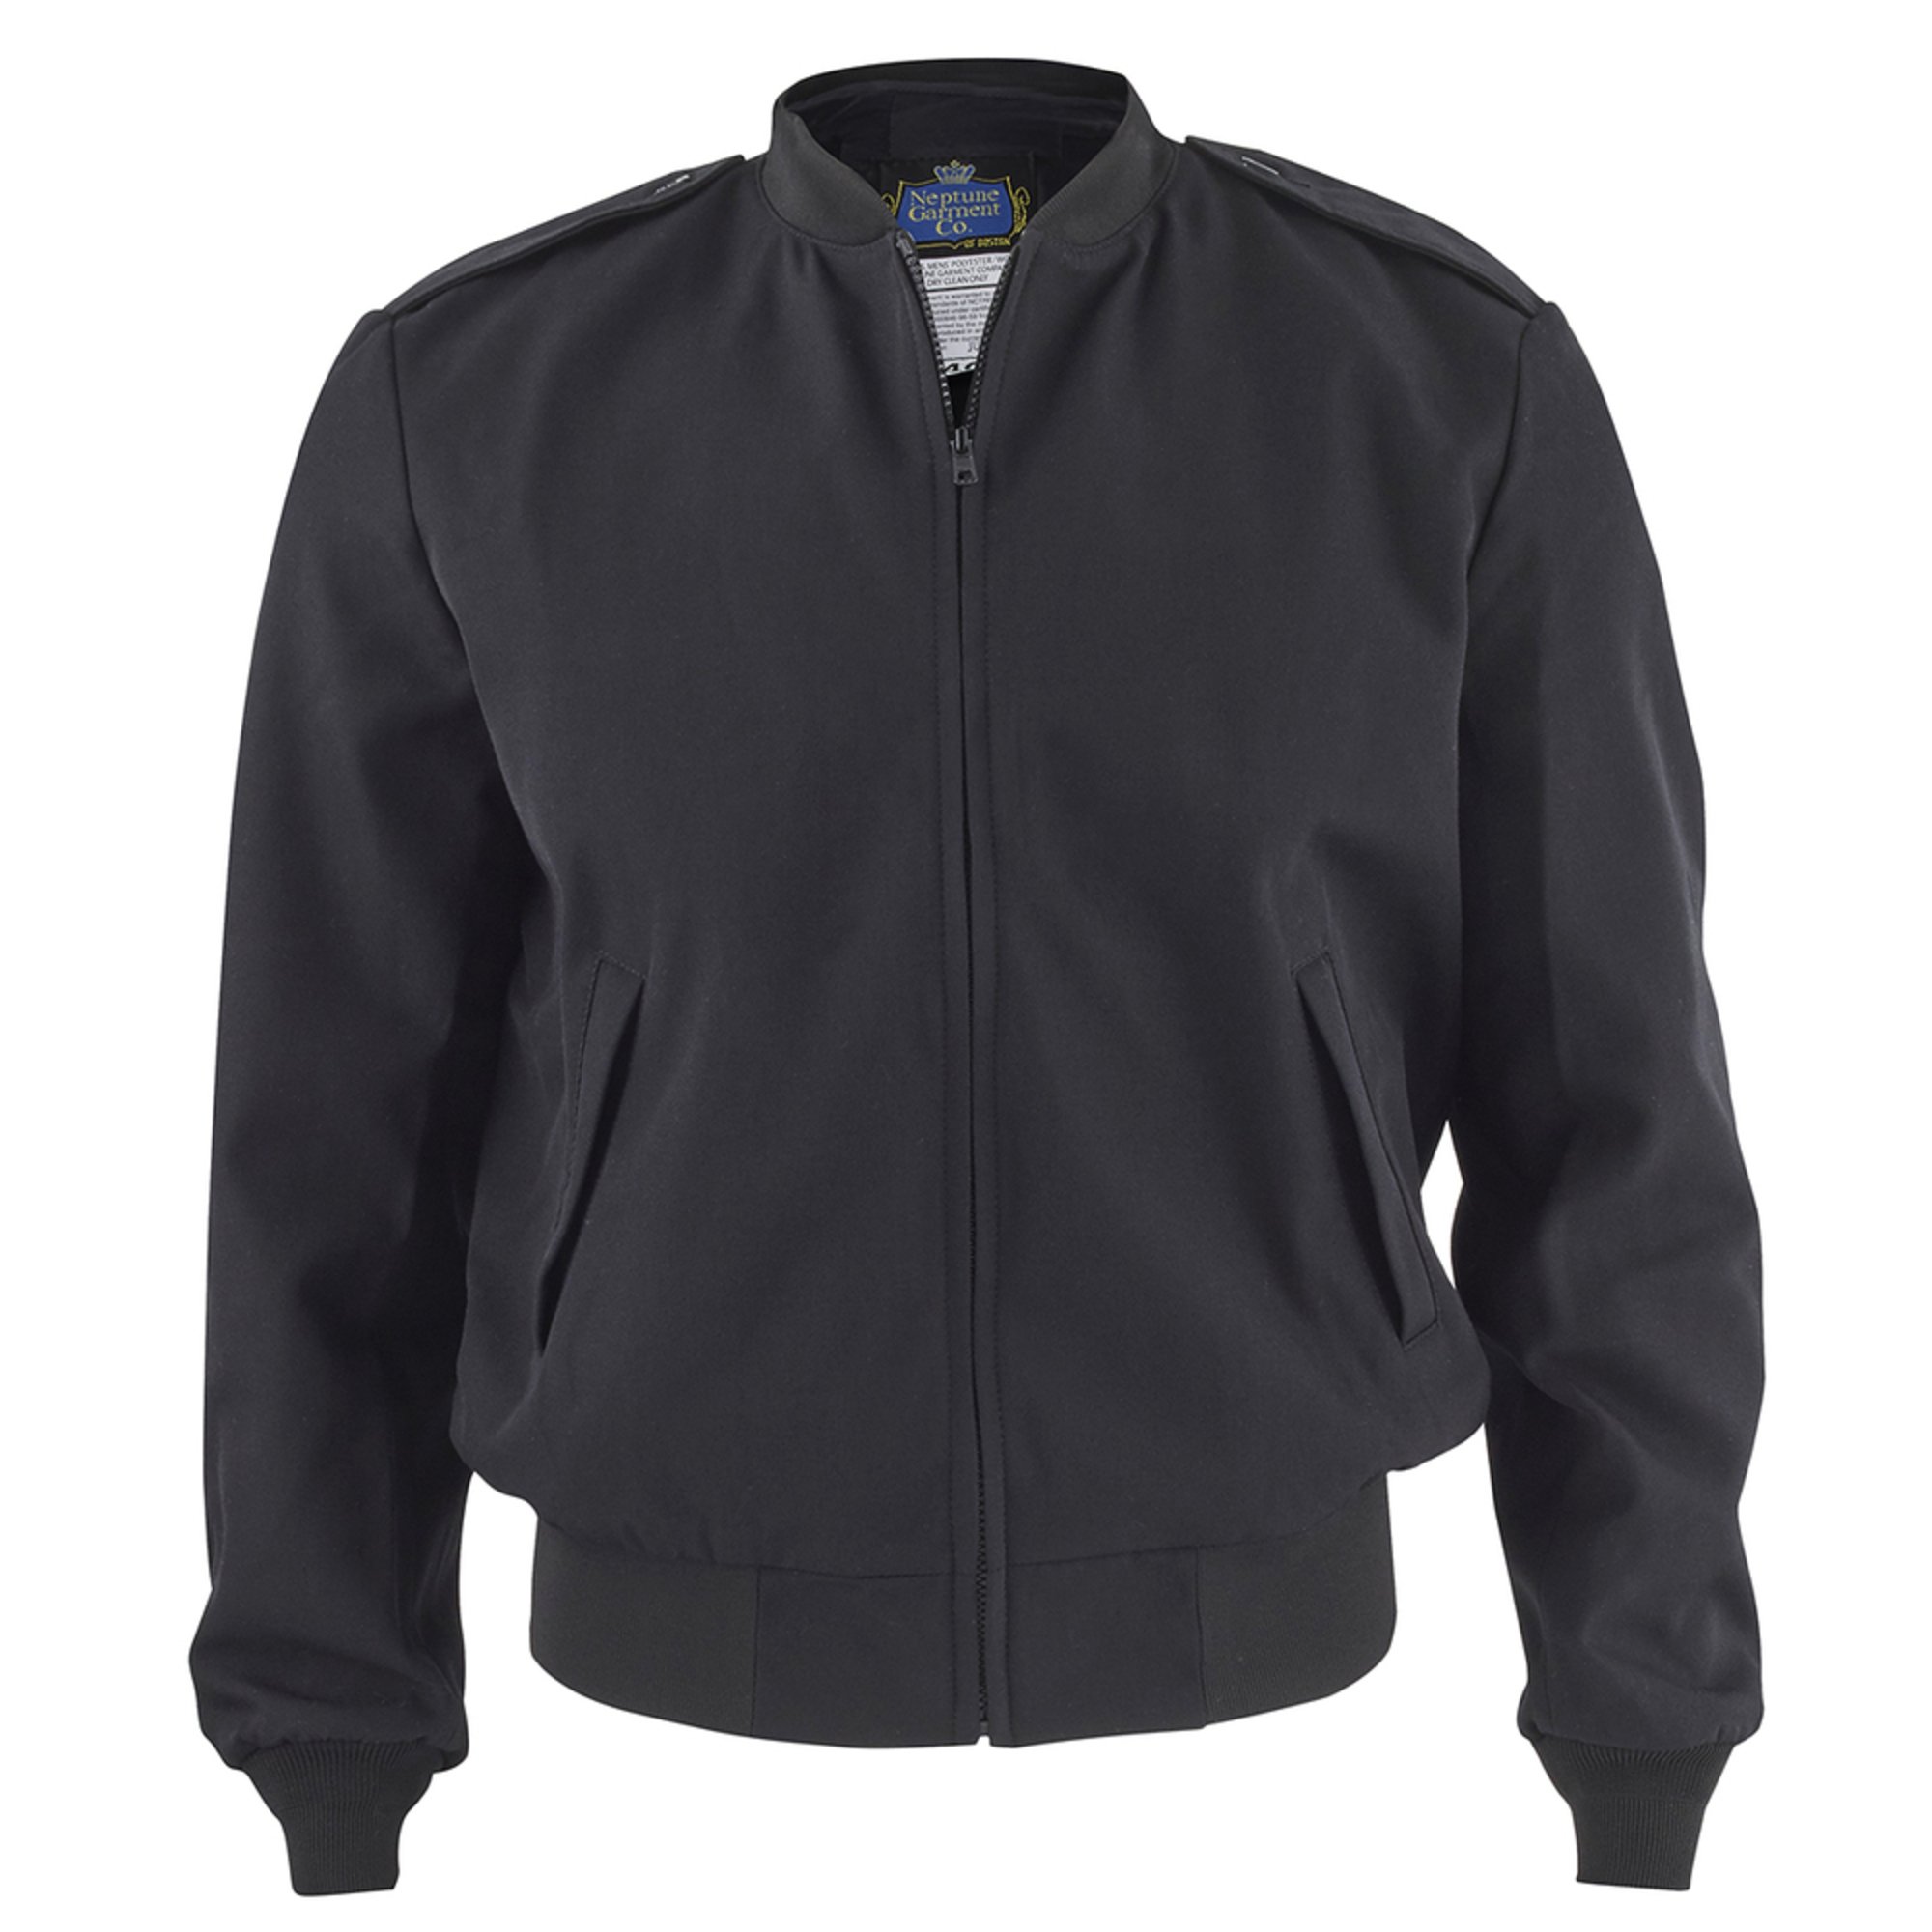 Men's Relaxed Fit Jacket | Men's Outerwear | Military - Shop Your Navy ...